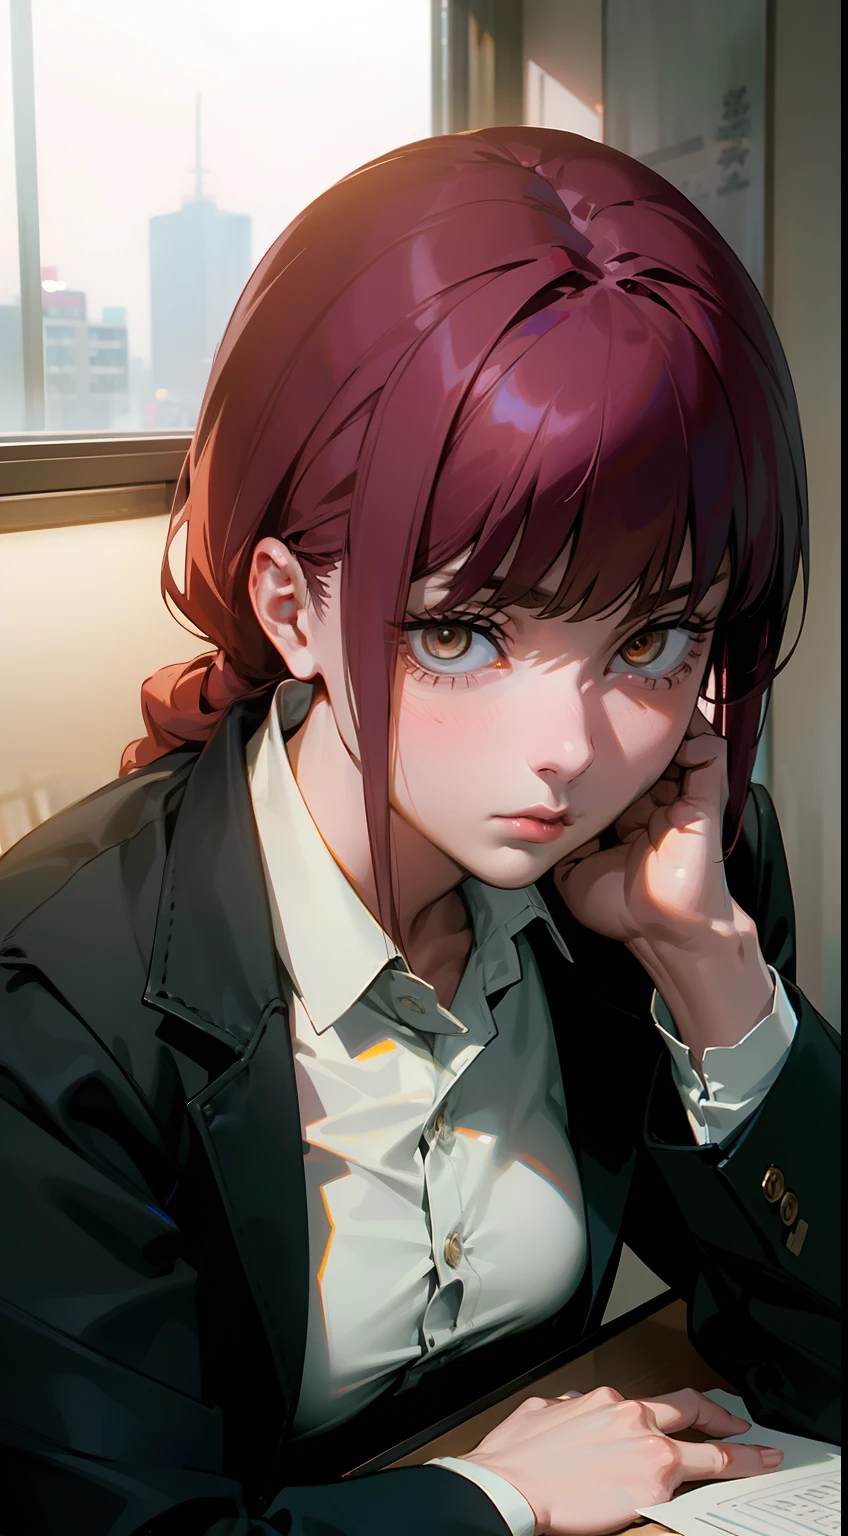 (best quality,realistic:1.37),ultra-detailed,professional,portrait,sharp focus,physically-based rendering,studio lighting,vivid colors,bokeh,photorealistic,photography,red theme,lighting effects, Makima from Chainsaw Man anime, detailed facial features,beautiful eyes,expressive look,rosy cheeks,dark makeup,long nails,classy appearance,determined expression,focused gaze,sophisticated,confident pose,modern office scene,high-rise city view,glass windows,city lights,computer monitors and keyboards,office desk with papers,phone on the desk,books and folders neatly arranged,professional attire,well-fitted blazer,button-up shirt,pencil skirt,high-heeled shoes,stylish accessories,wristwatch,handbag,sleek hairstyle,polished appearance.